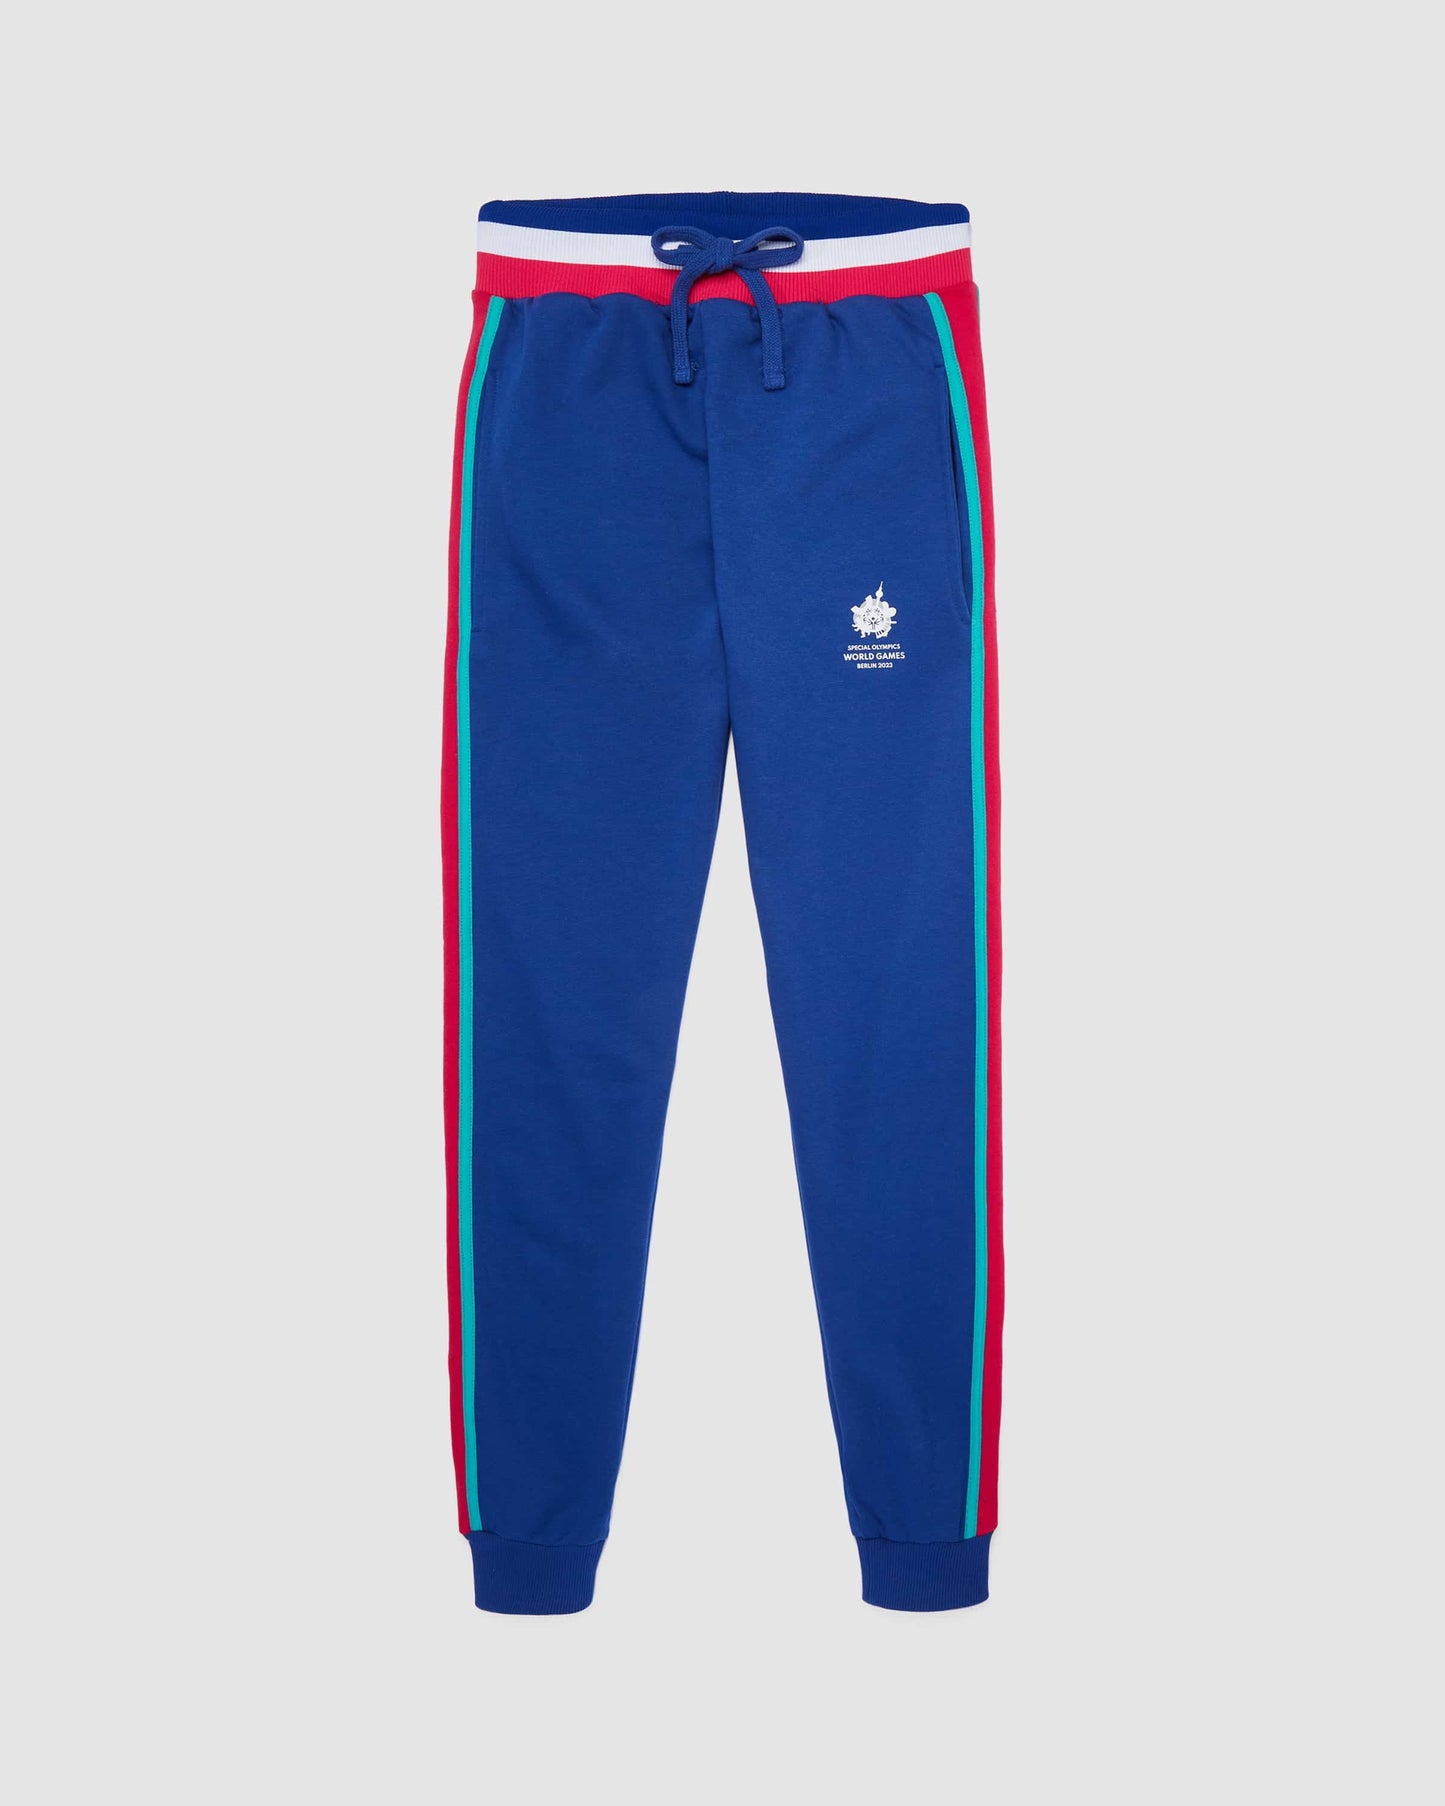 Blue Sweatpants with Striped Waistband World Games Unisex